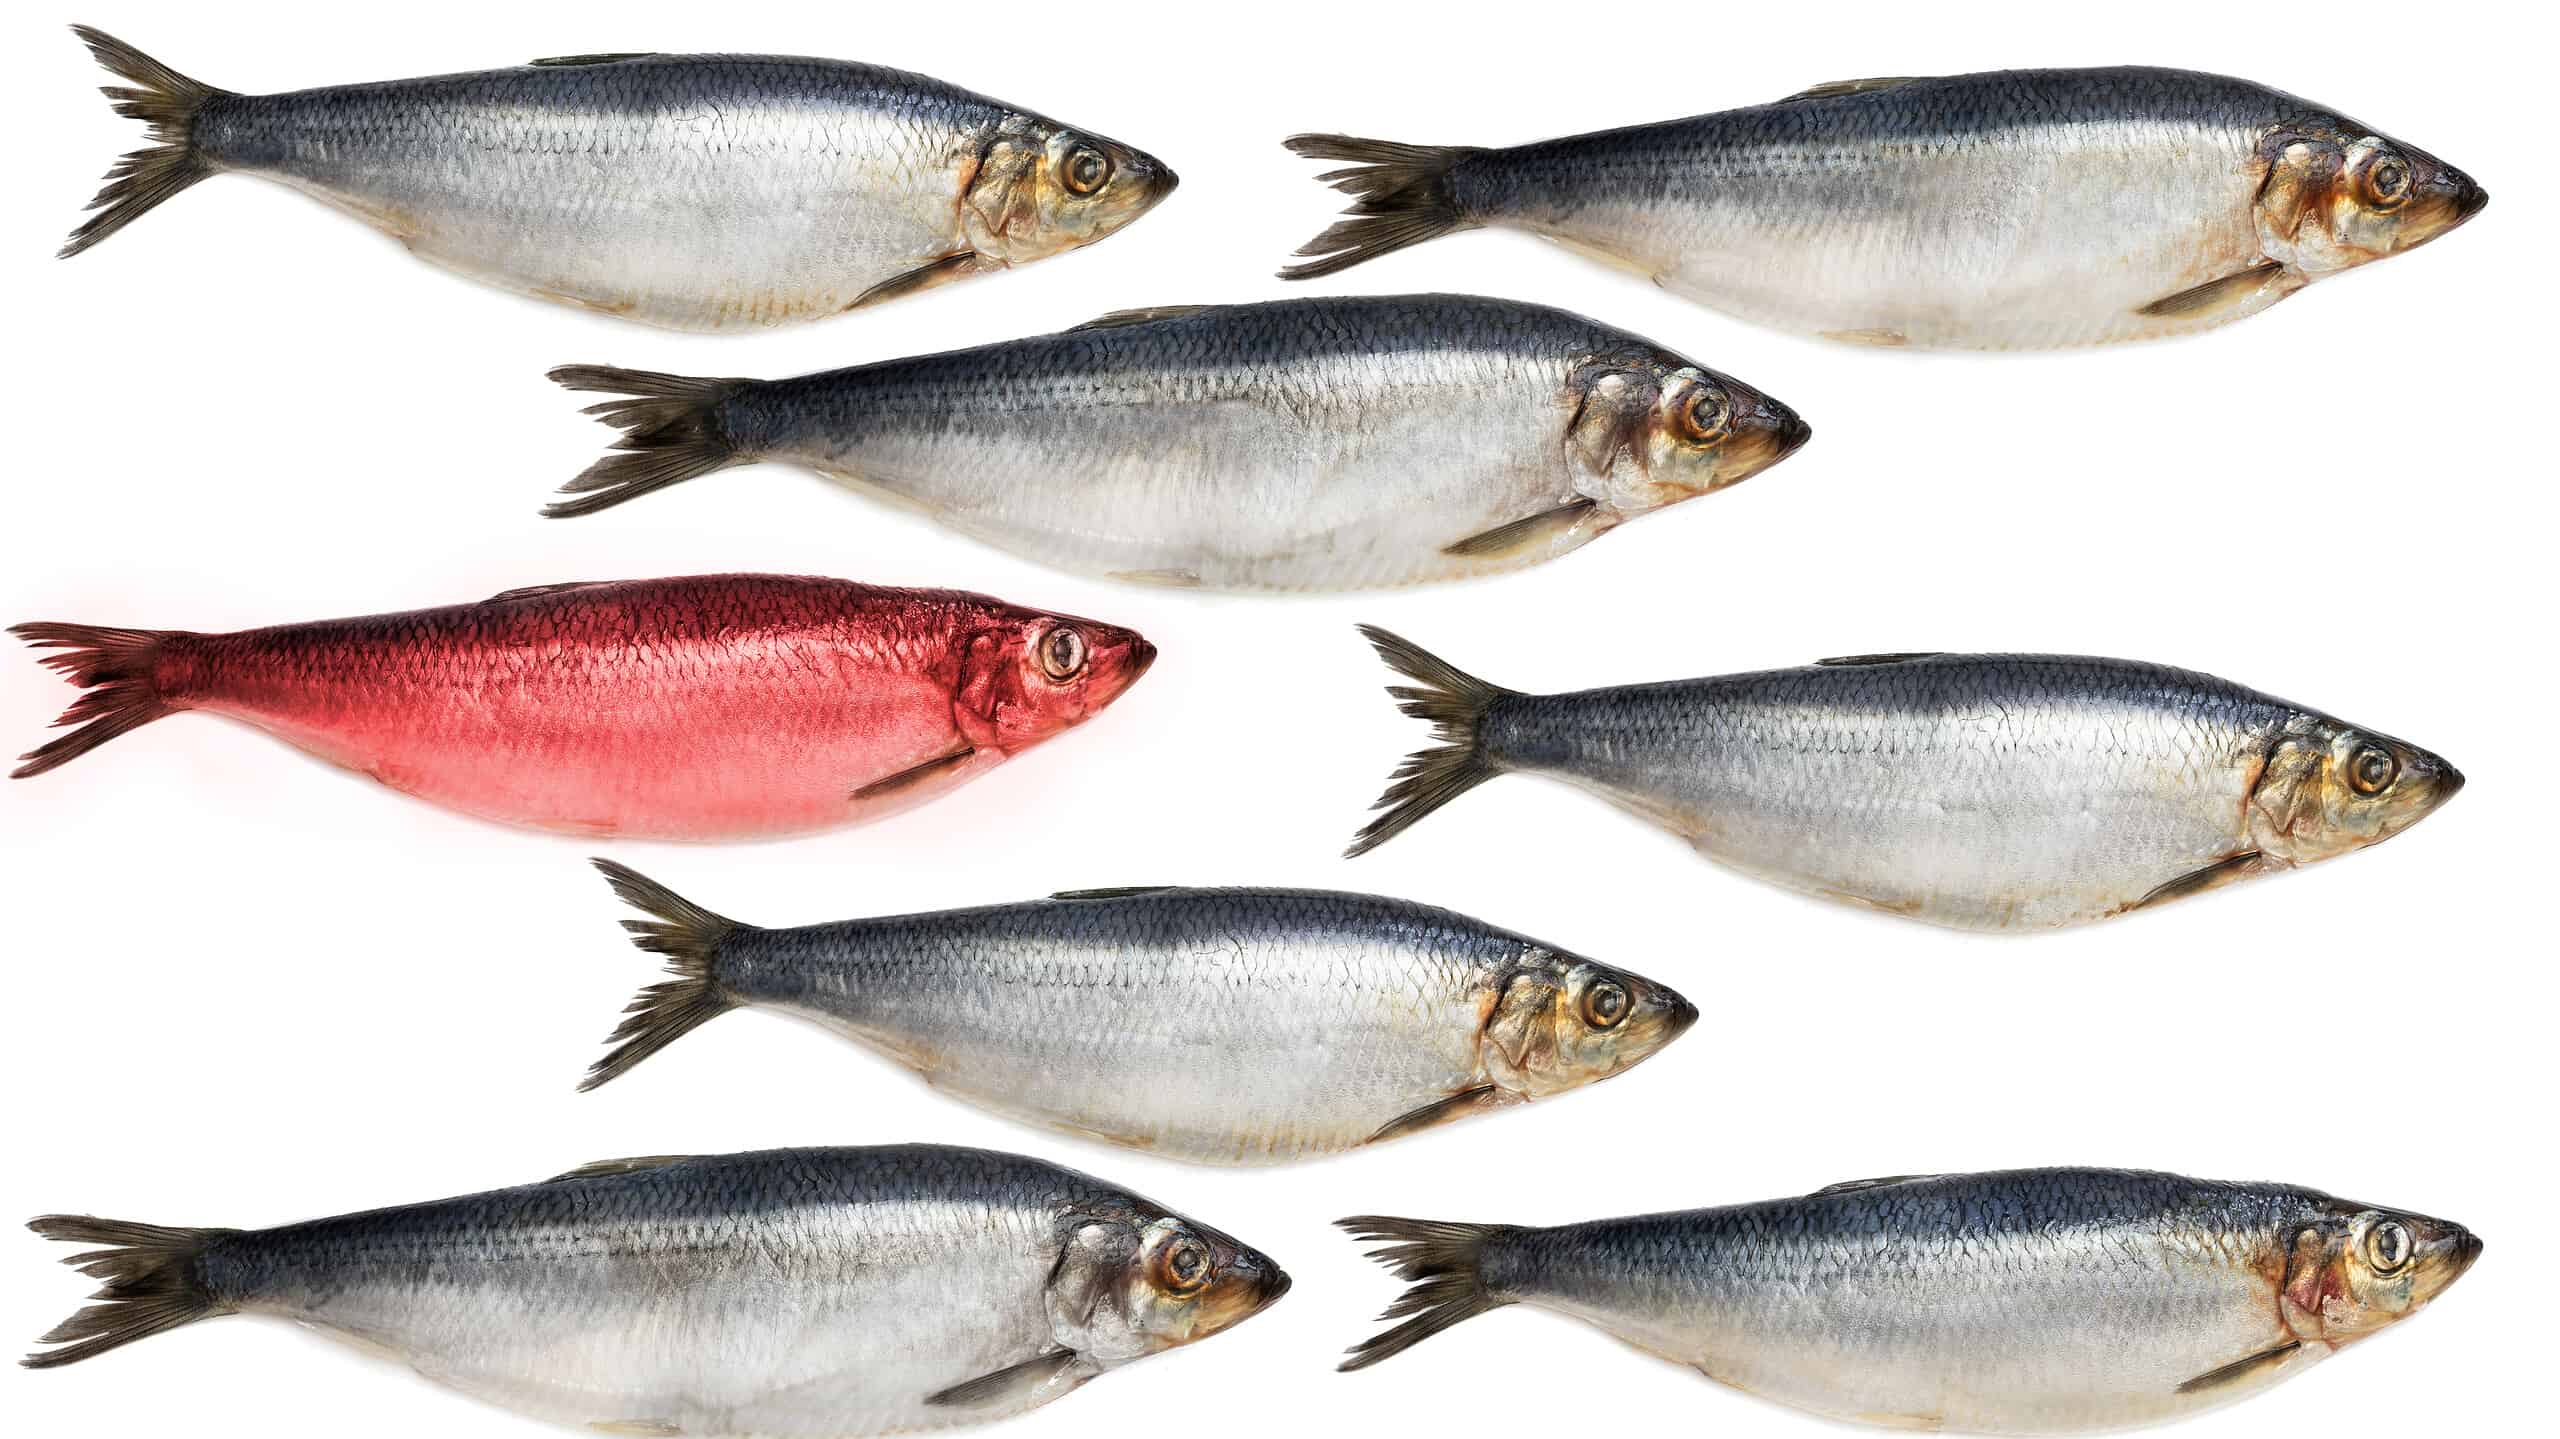 trekant Hjemland Overskyet A "Red Herring" — Meaning and Origin Revealed - AZ Animals